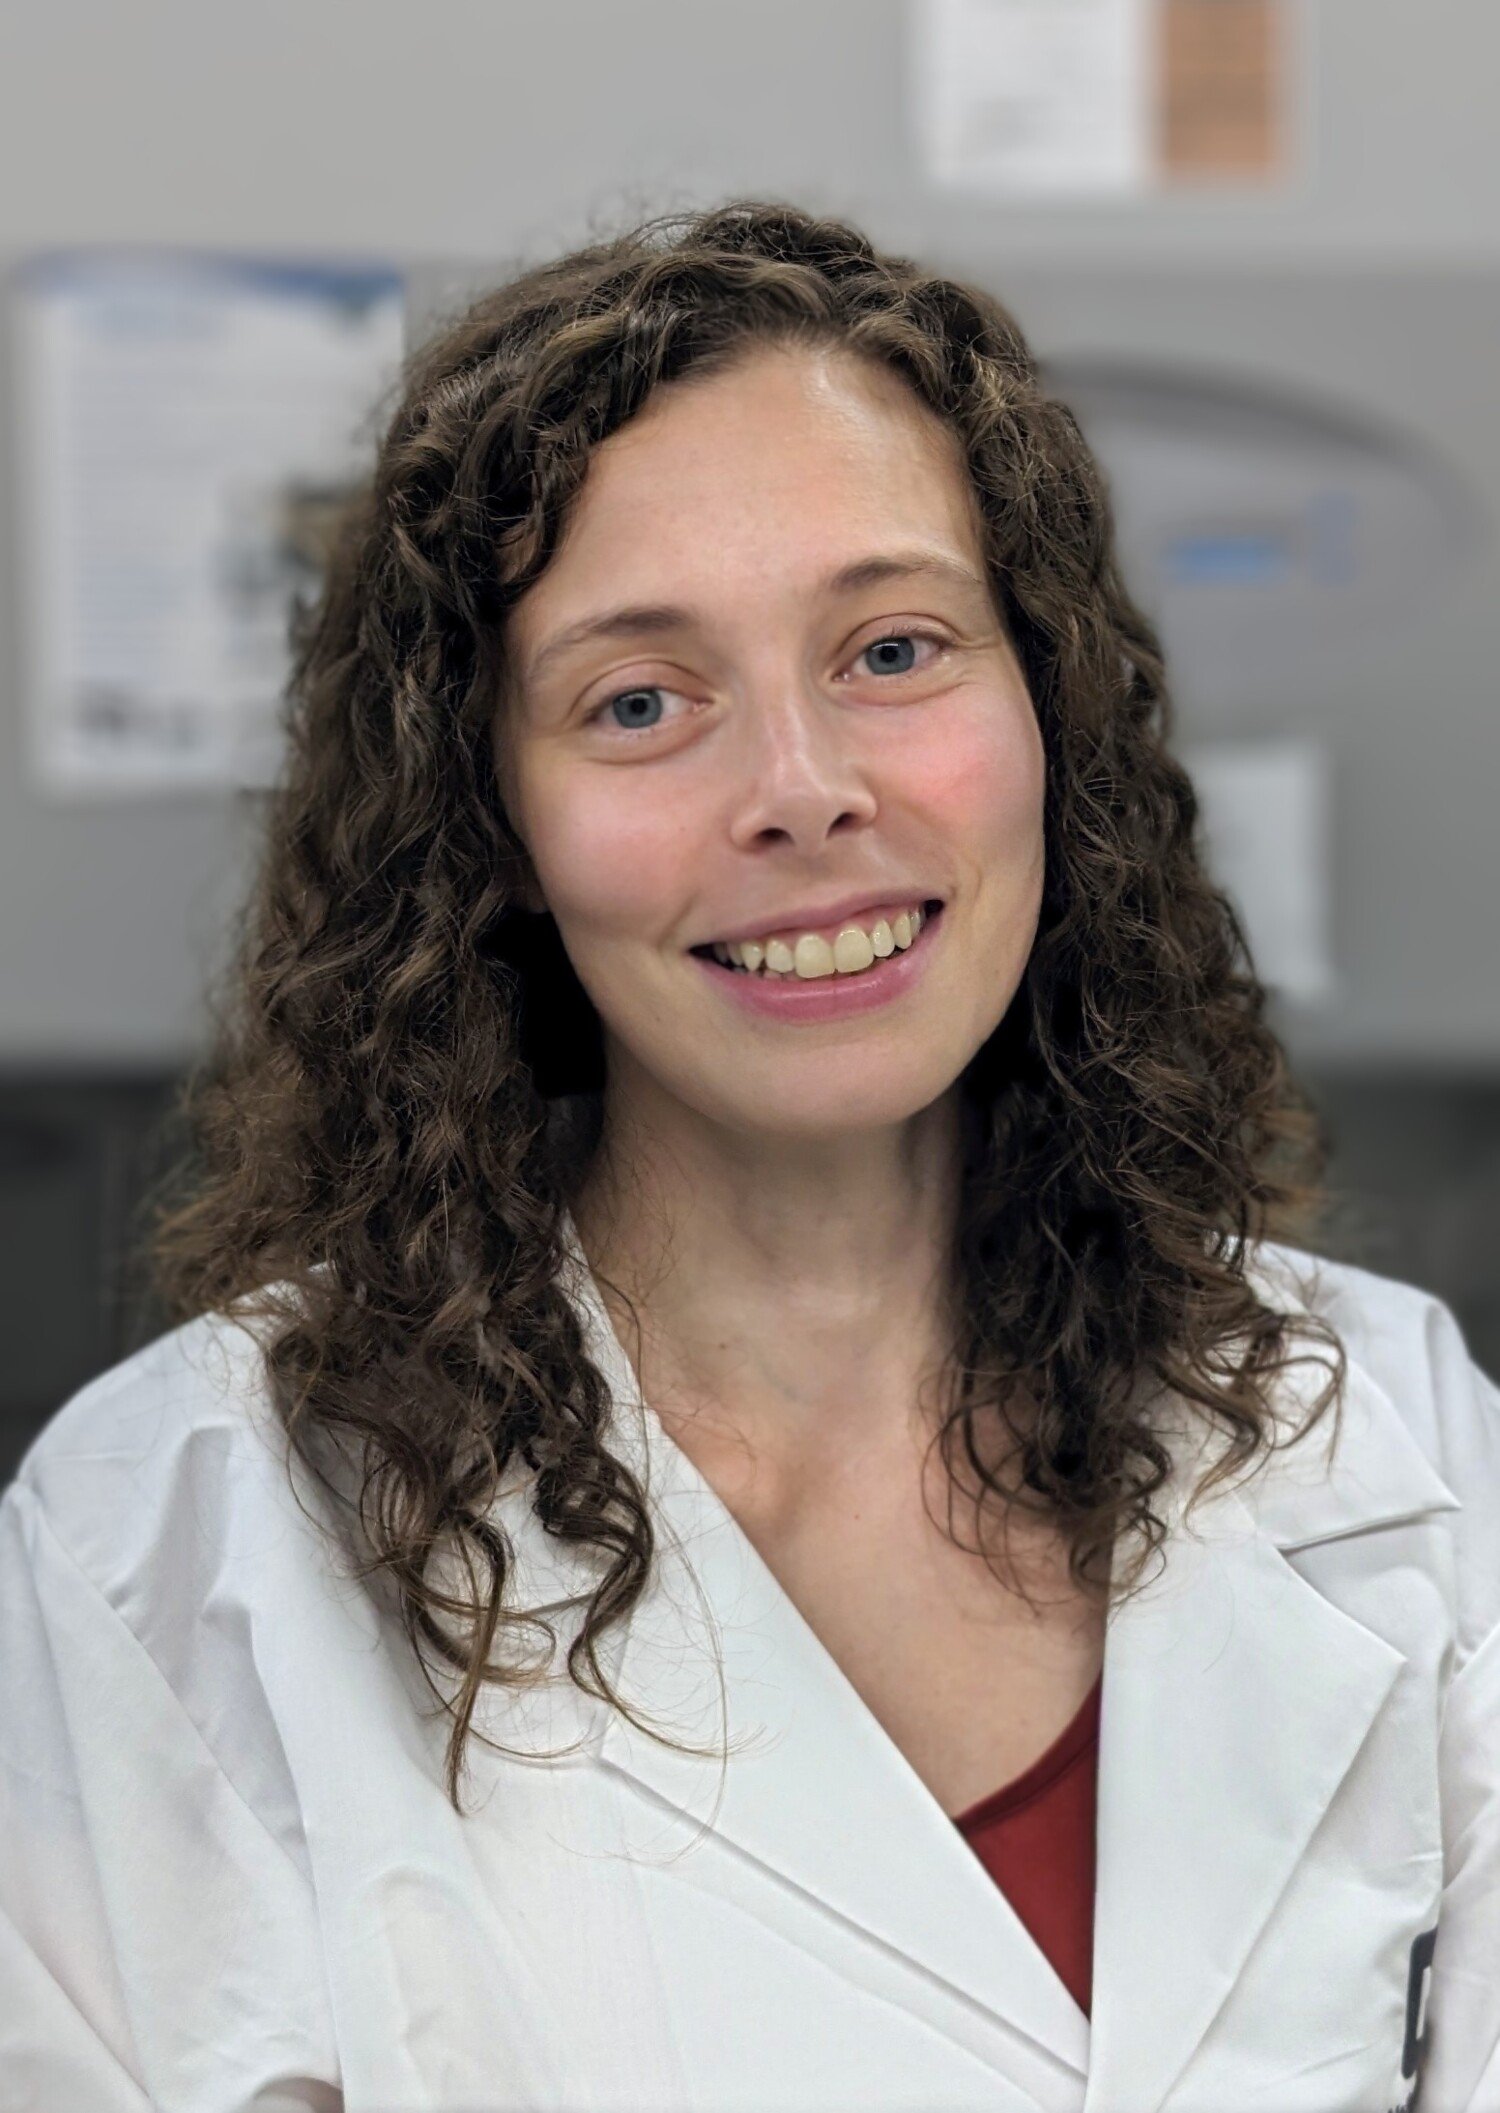 Portrait of a woman in lab coat with curly hair.